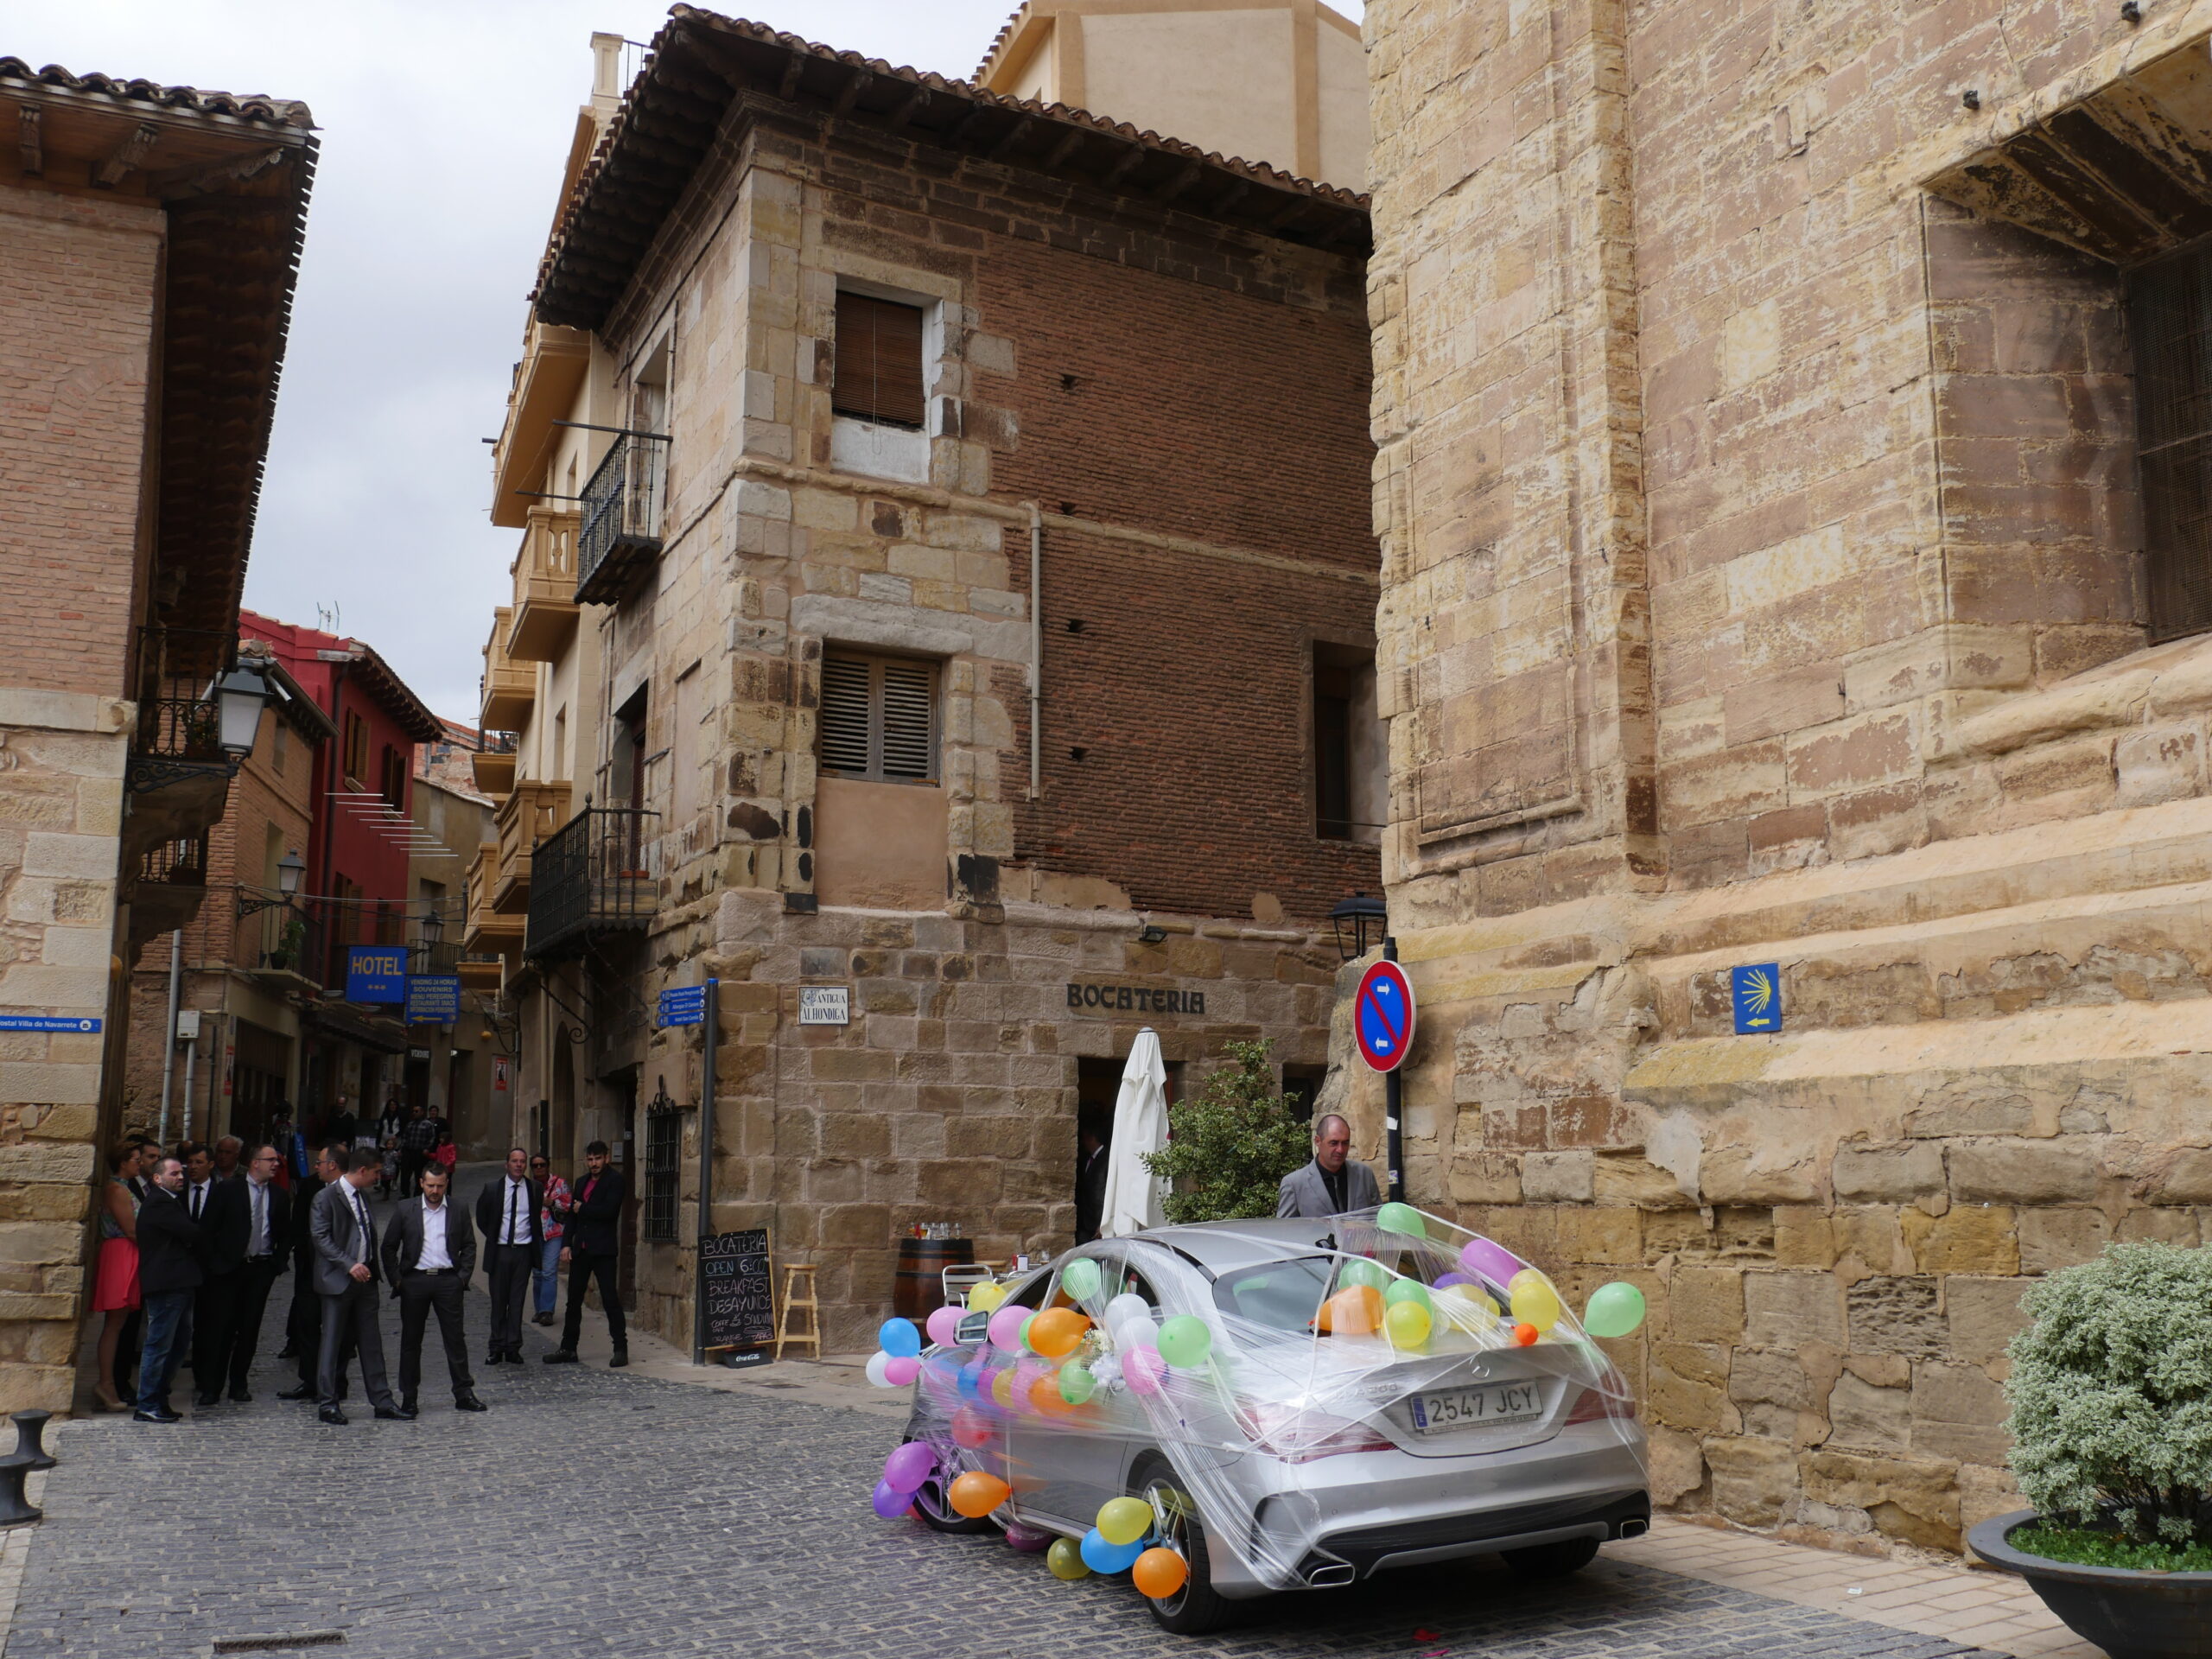 Groomsman and a decorated car sit outside the Iglesia de La Asunci&oacute;n in Navarrete, Spain in preparation for a wedding.